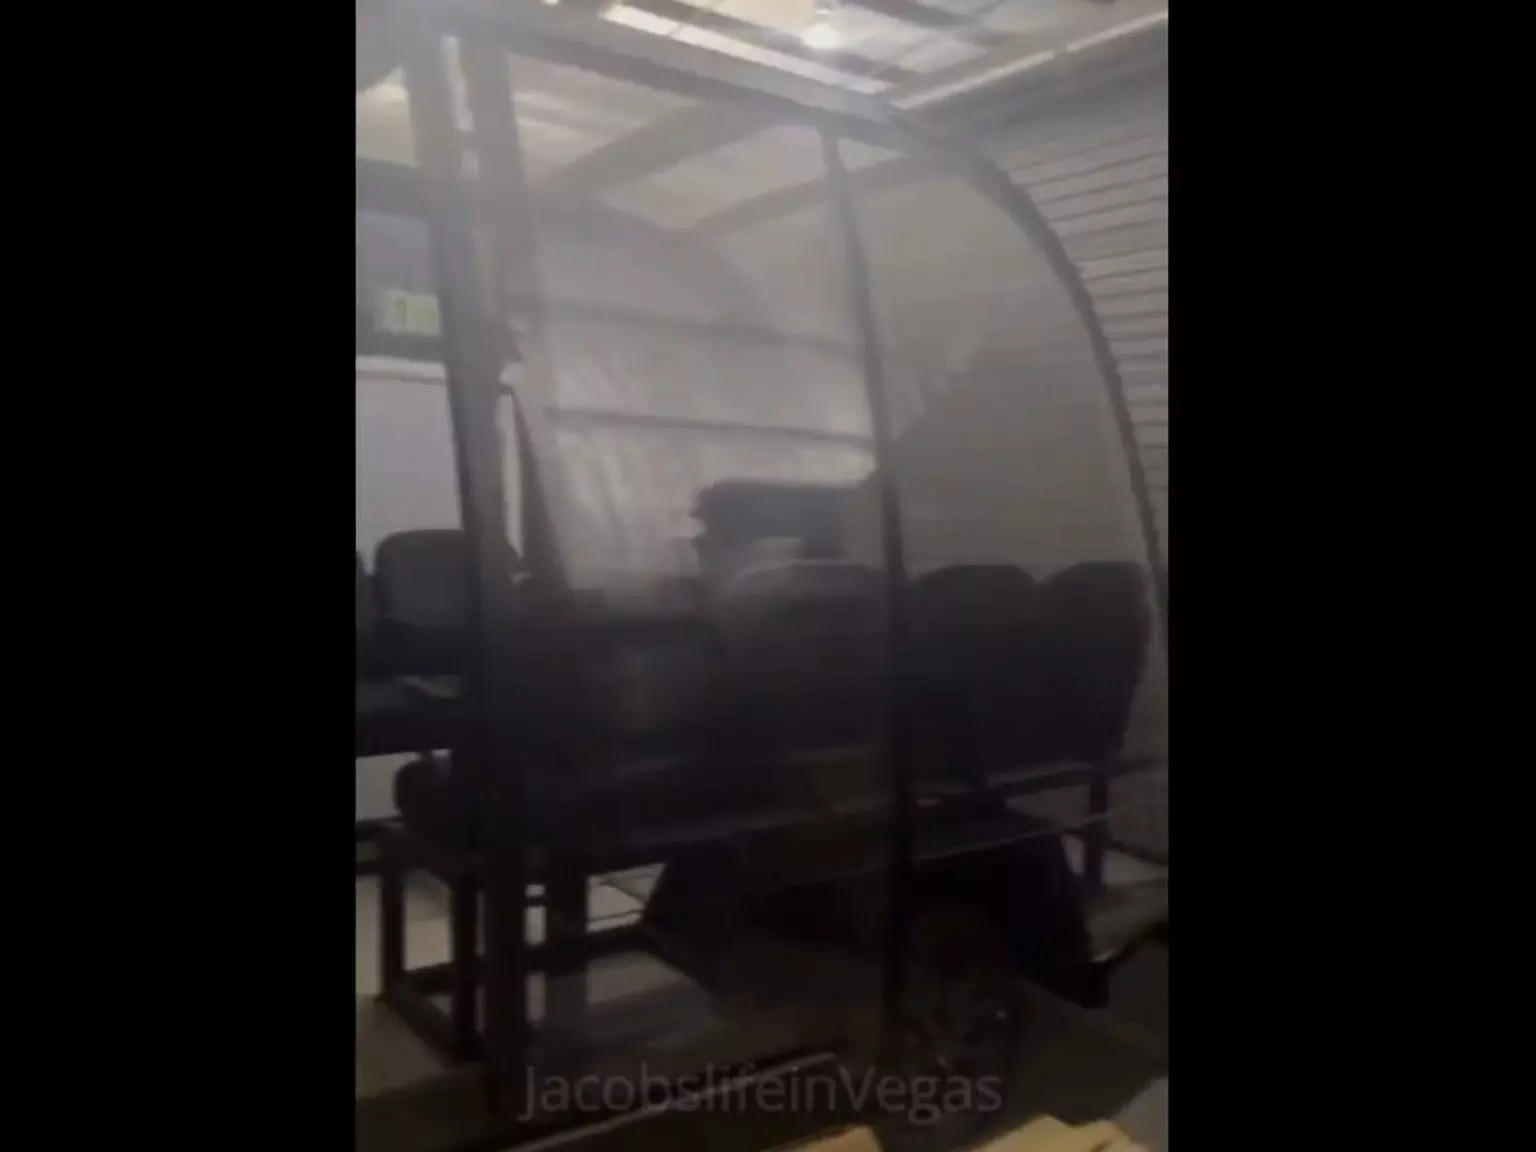 Jacob Orth shared a video of what he says is an early prototype for The Boring Company.